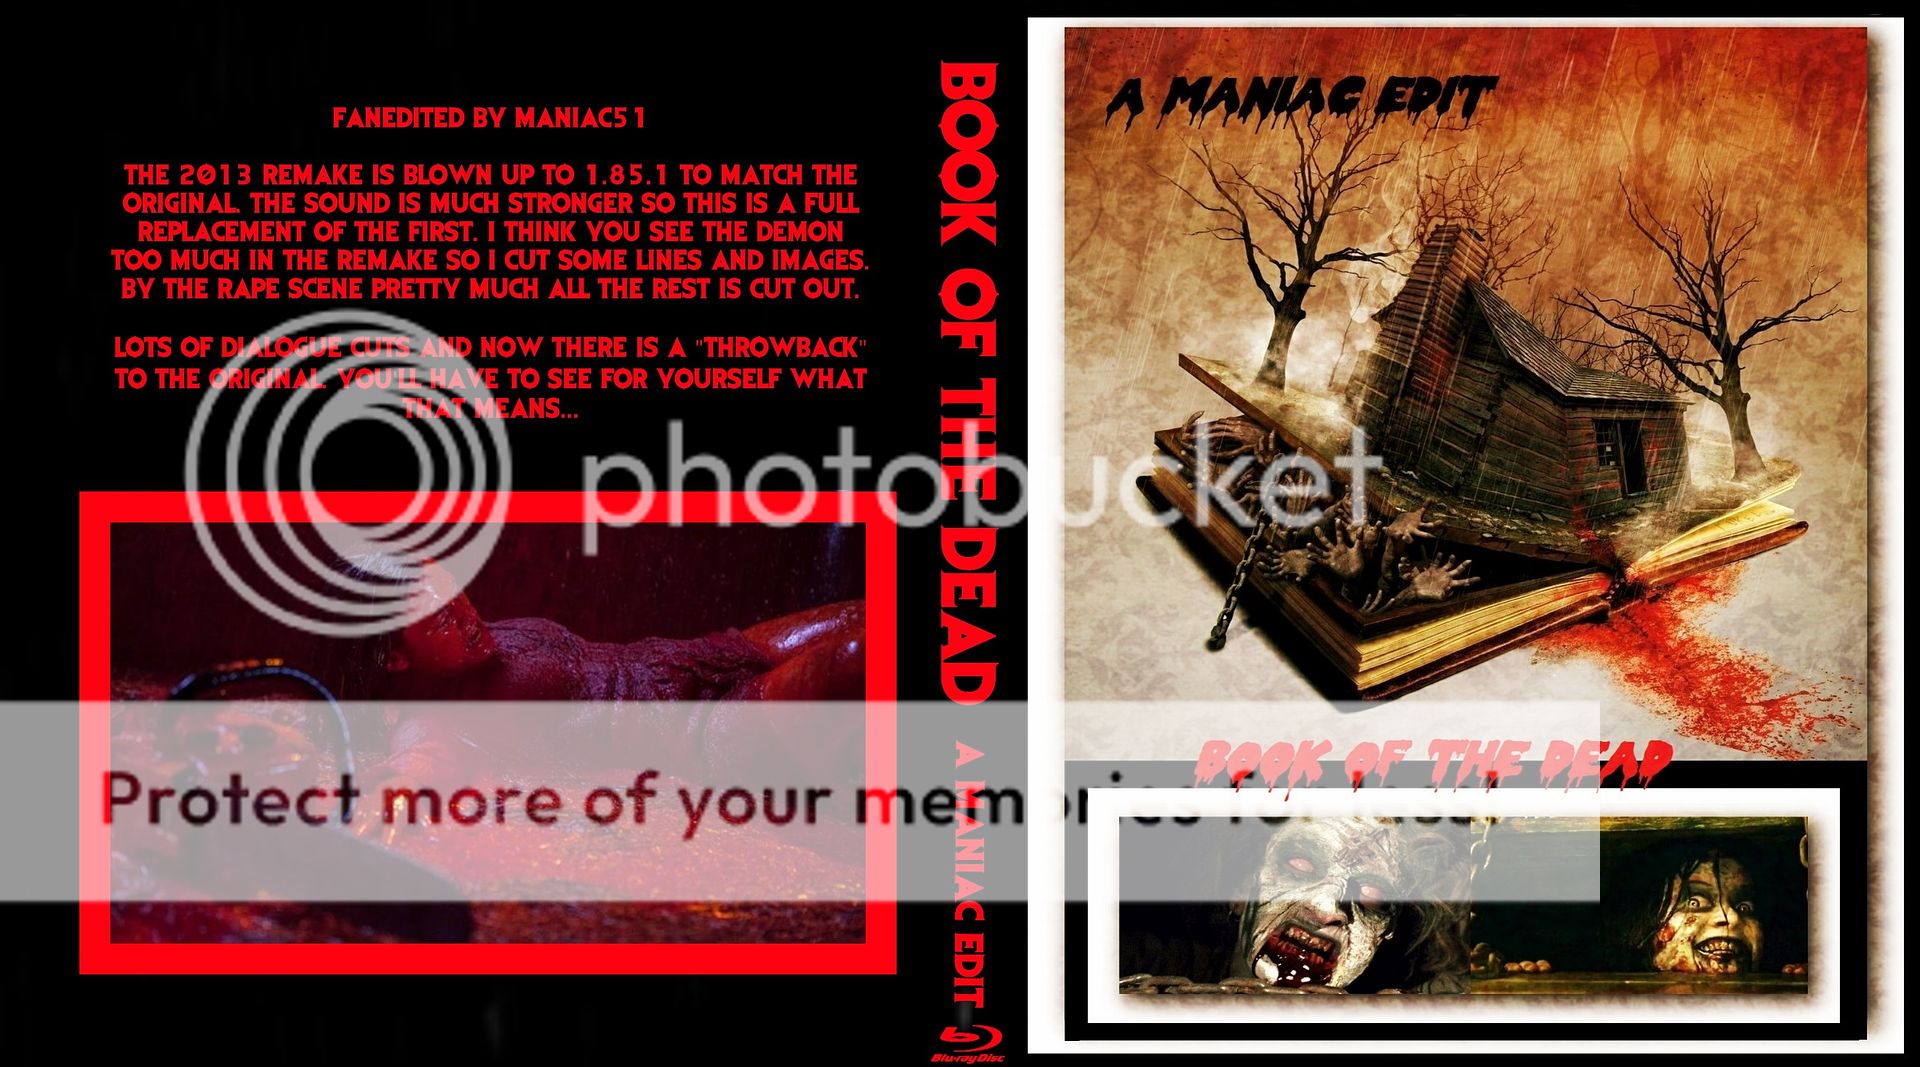 book%20of%20the%20dead%20bluray%20cover.jpg